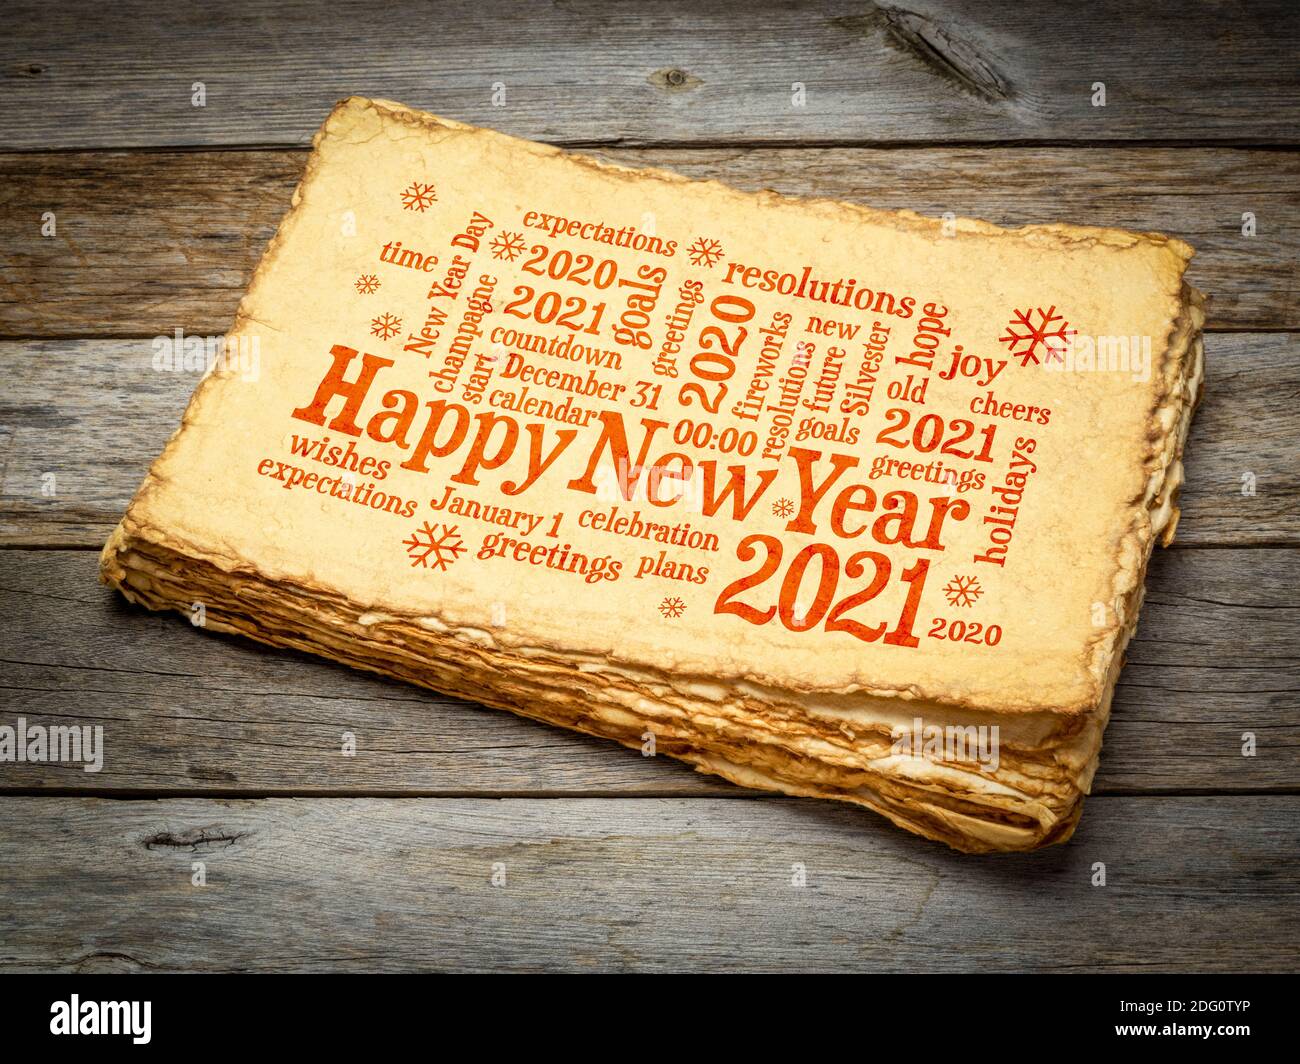 Happy New Year 2021 greetings card  - word cloud on a retro handmade paper Stock Photo